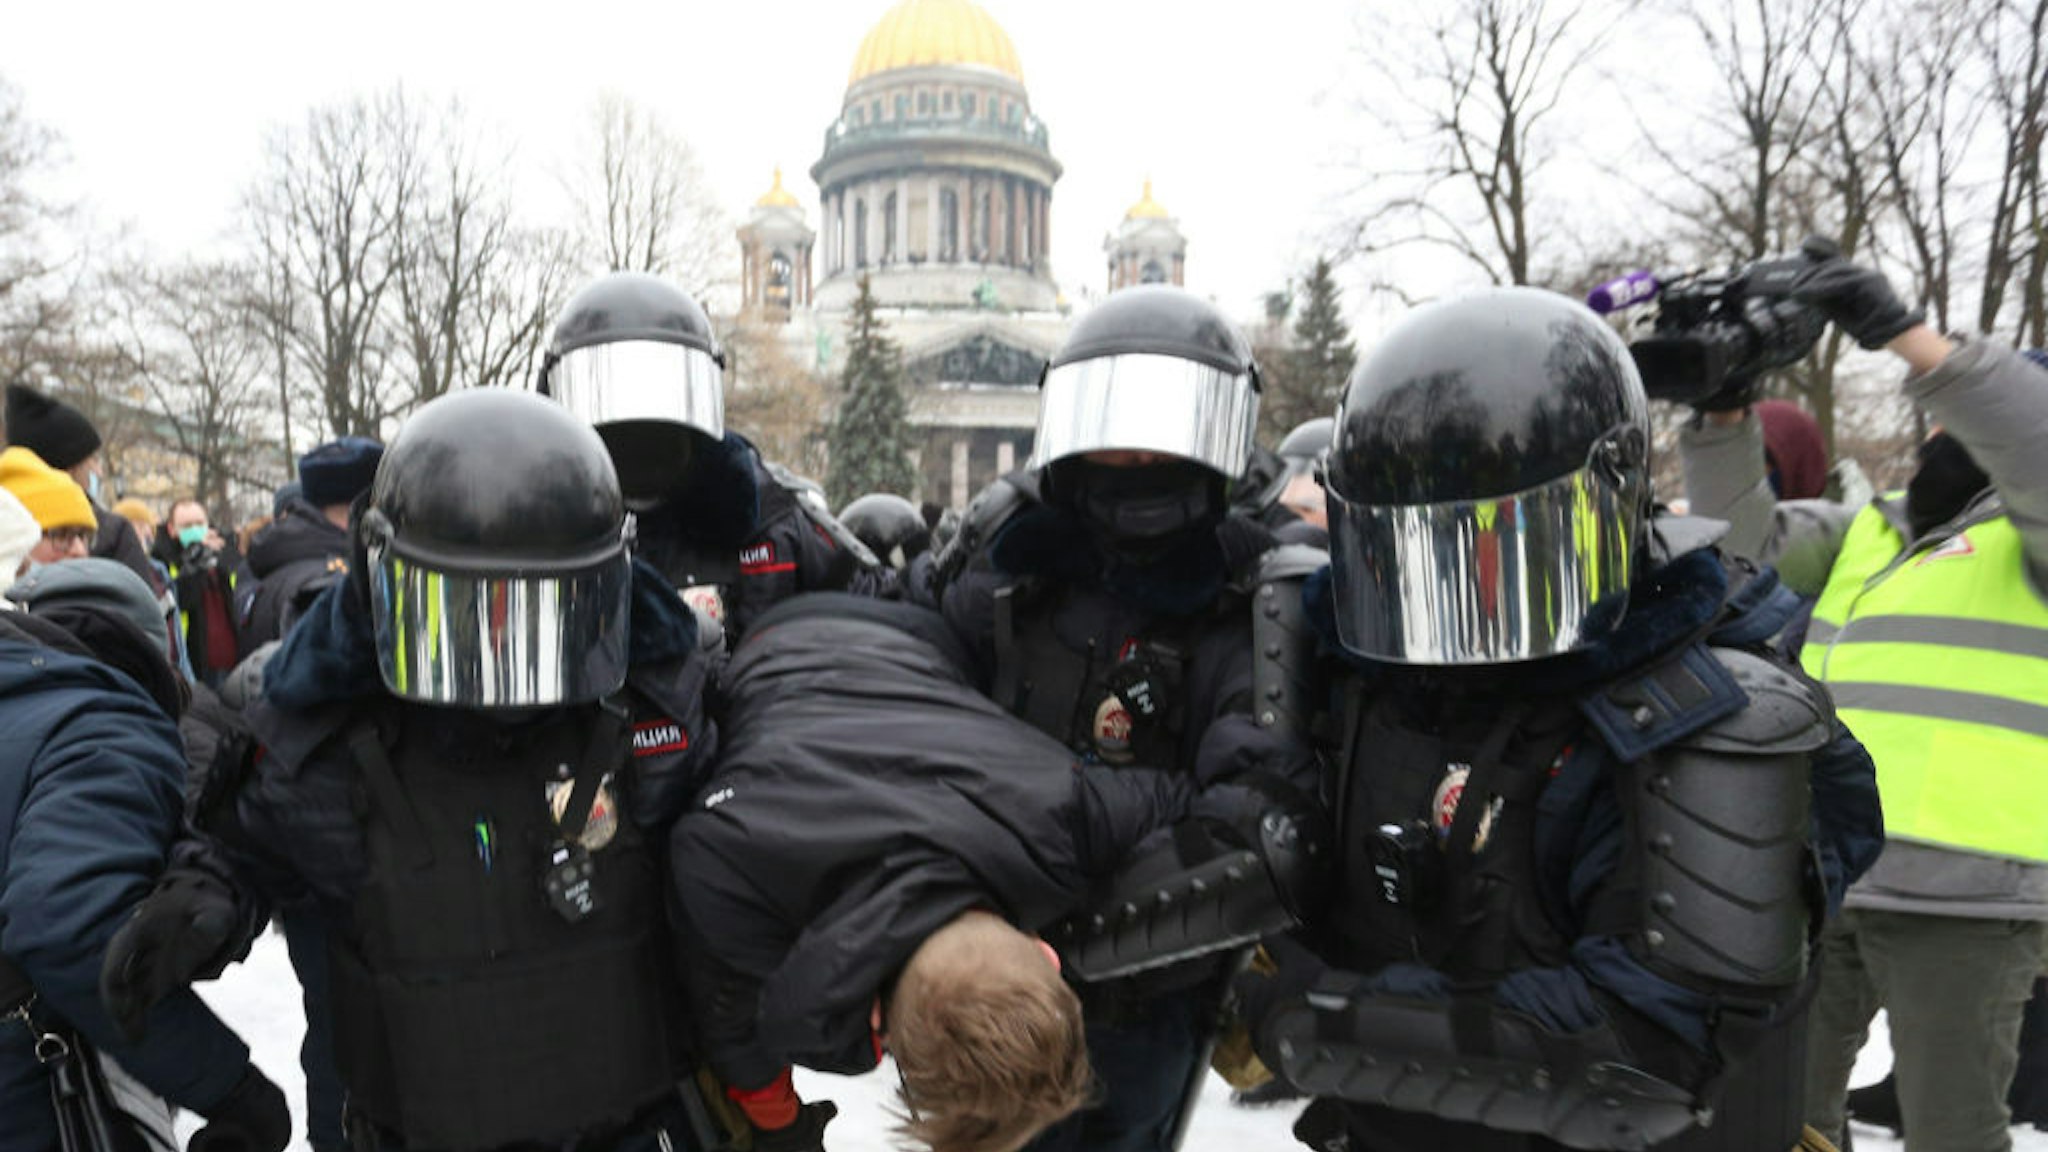 Police officers detain a protester during a rally in support of Alexei Navalny Politica in St. Petersburg, Russia, on January 23, 2021. Opposition politician Alexei Navalny has returned after poisoning from Germany to Russia and was detained at the airport in Moscow. (Photo by Valya Egorshin/NurPhoto via Getty Images)